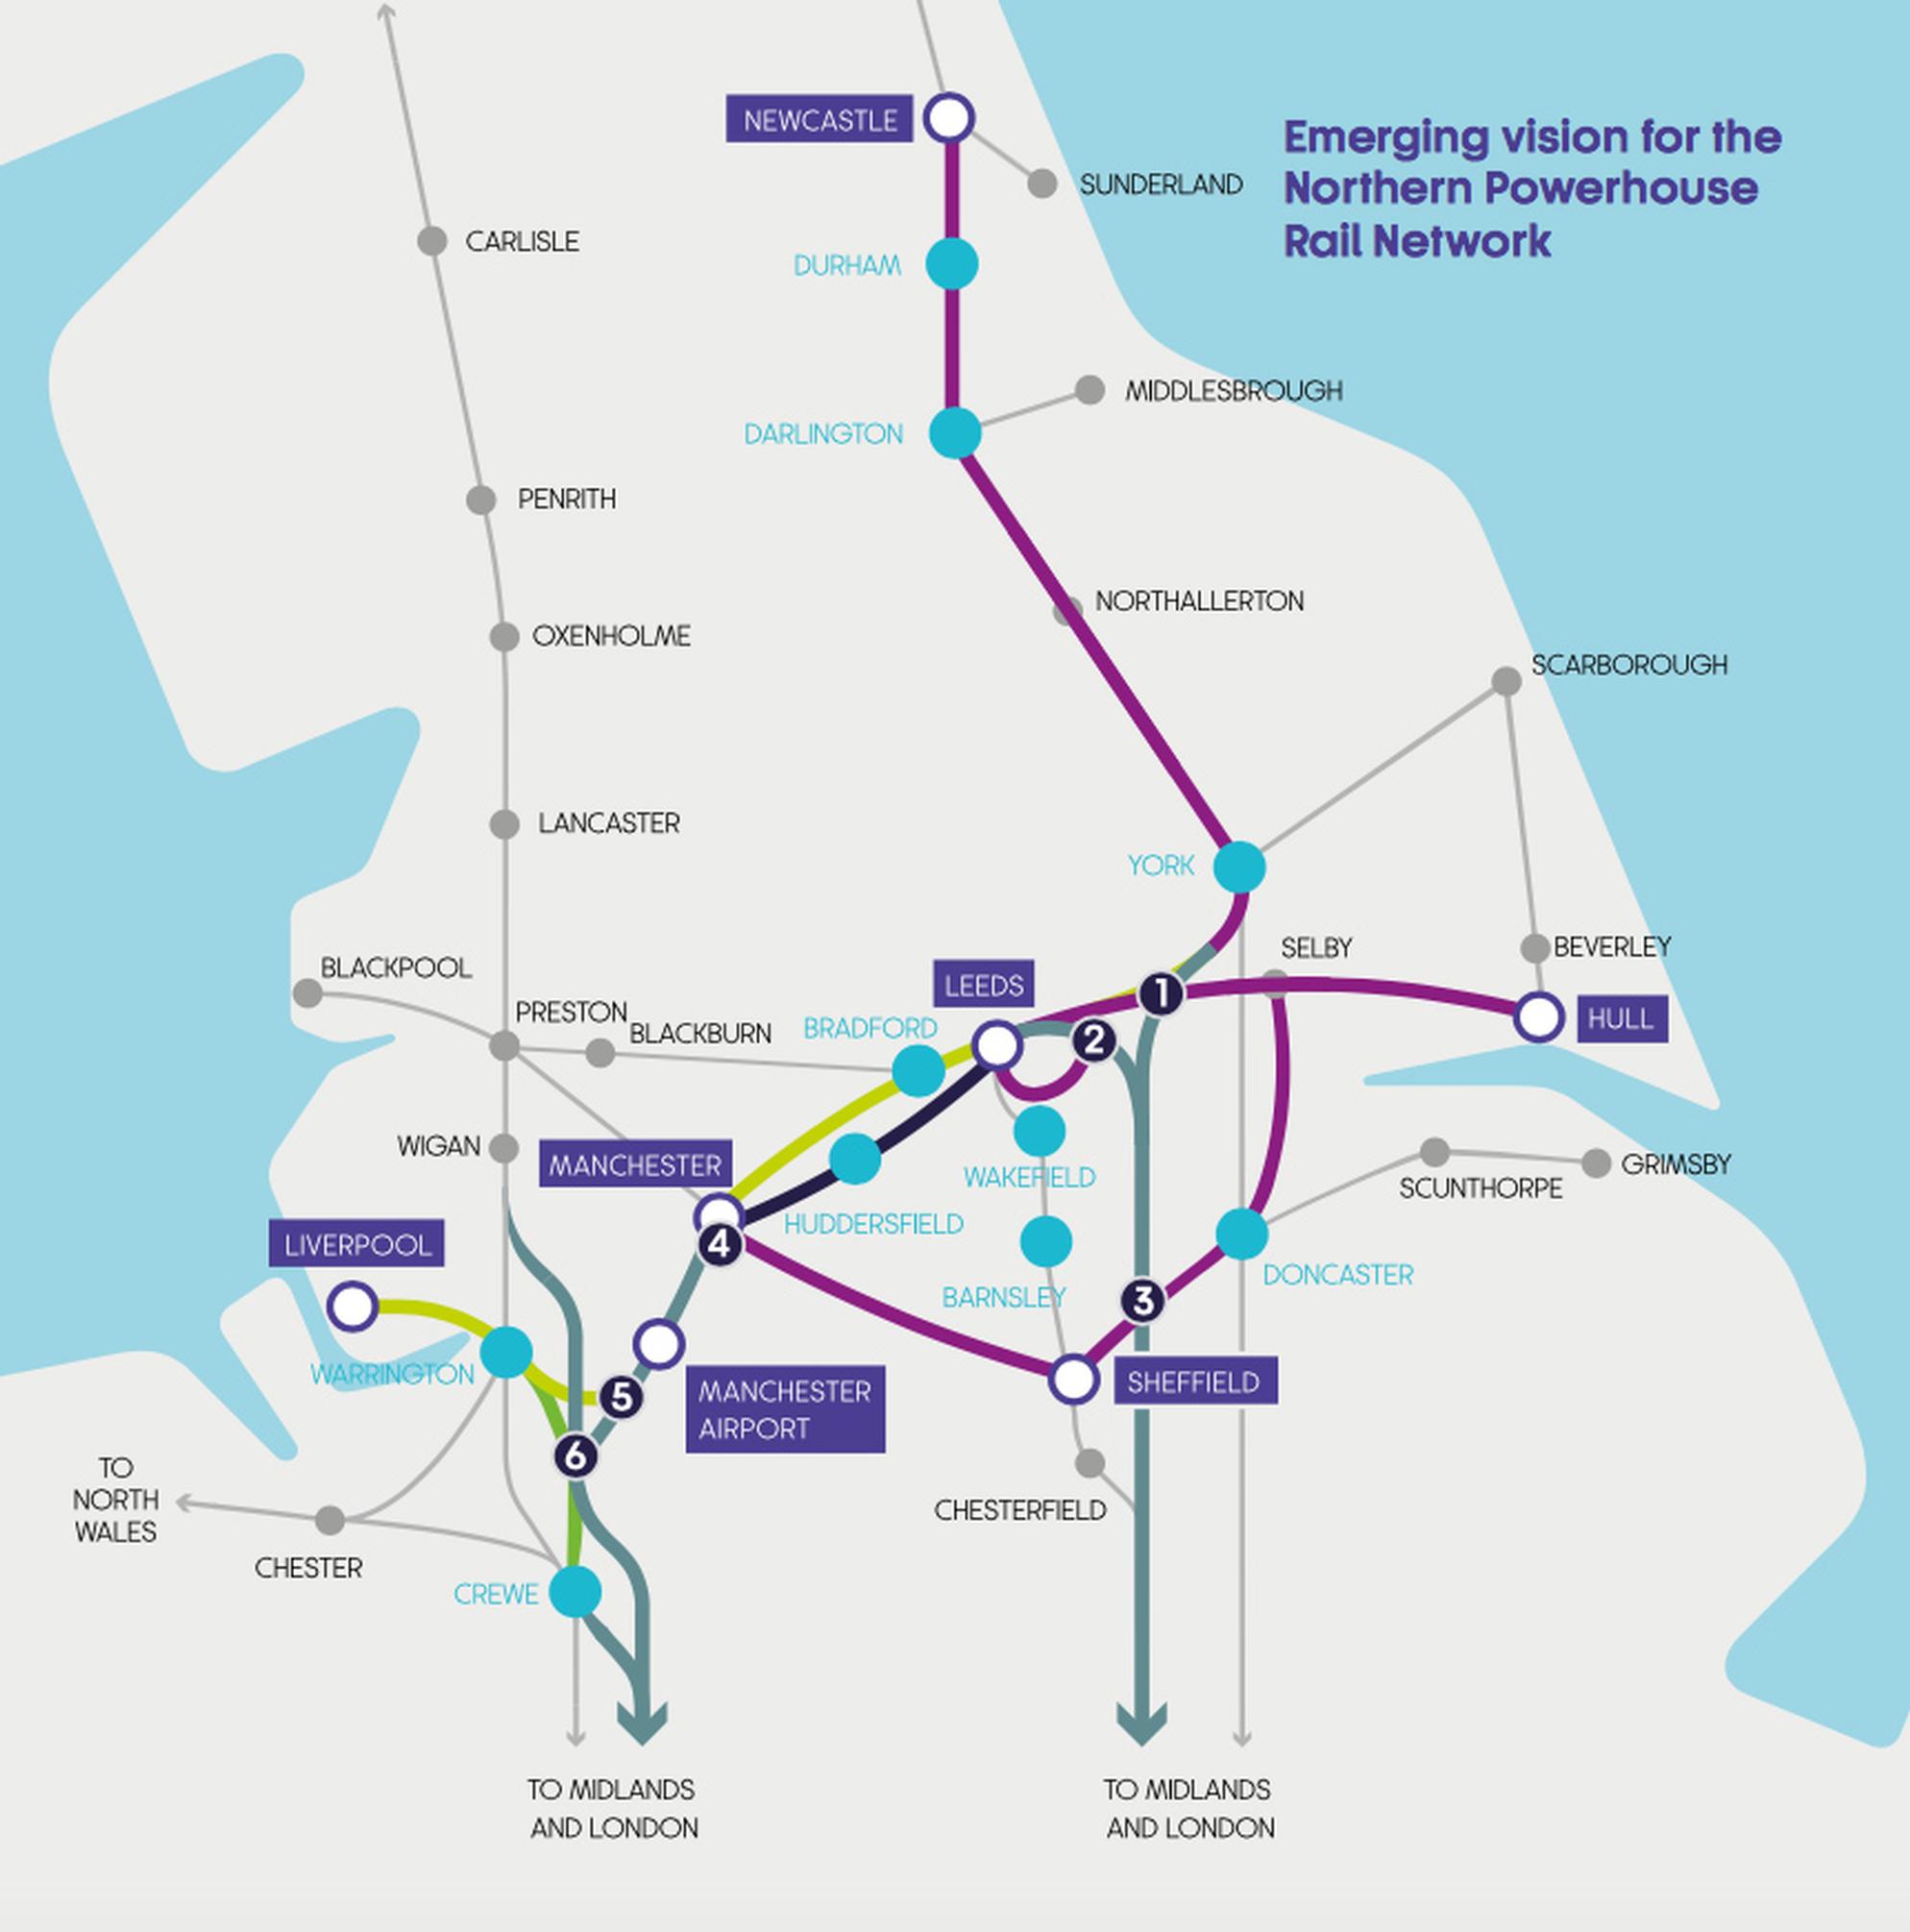 Northern Powerhouse Rail: the HS2/NPR junctions being consulted on by the DfT are numbered 5 and 6